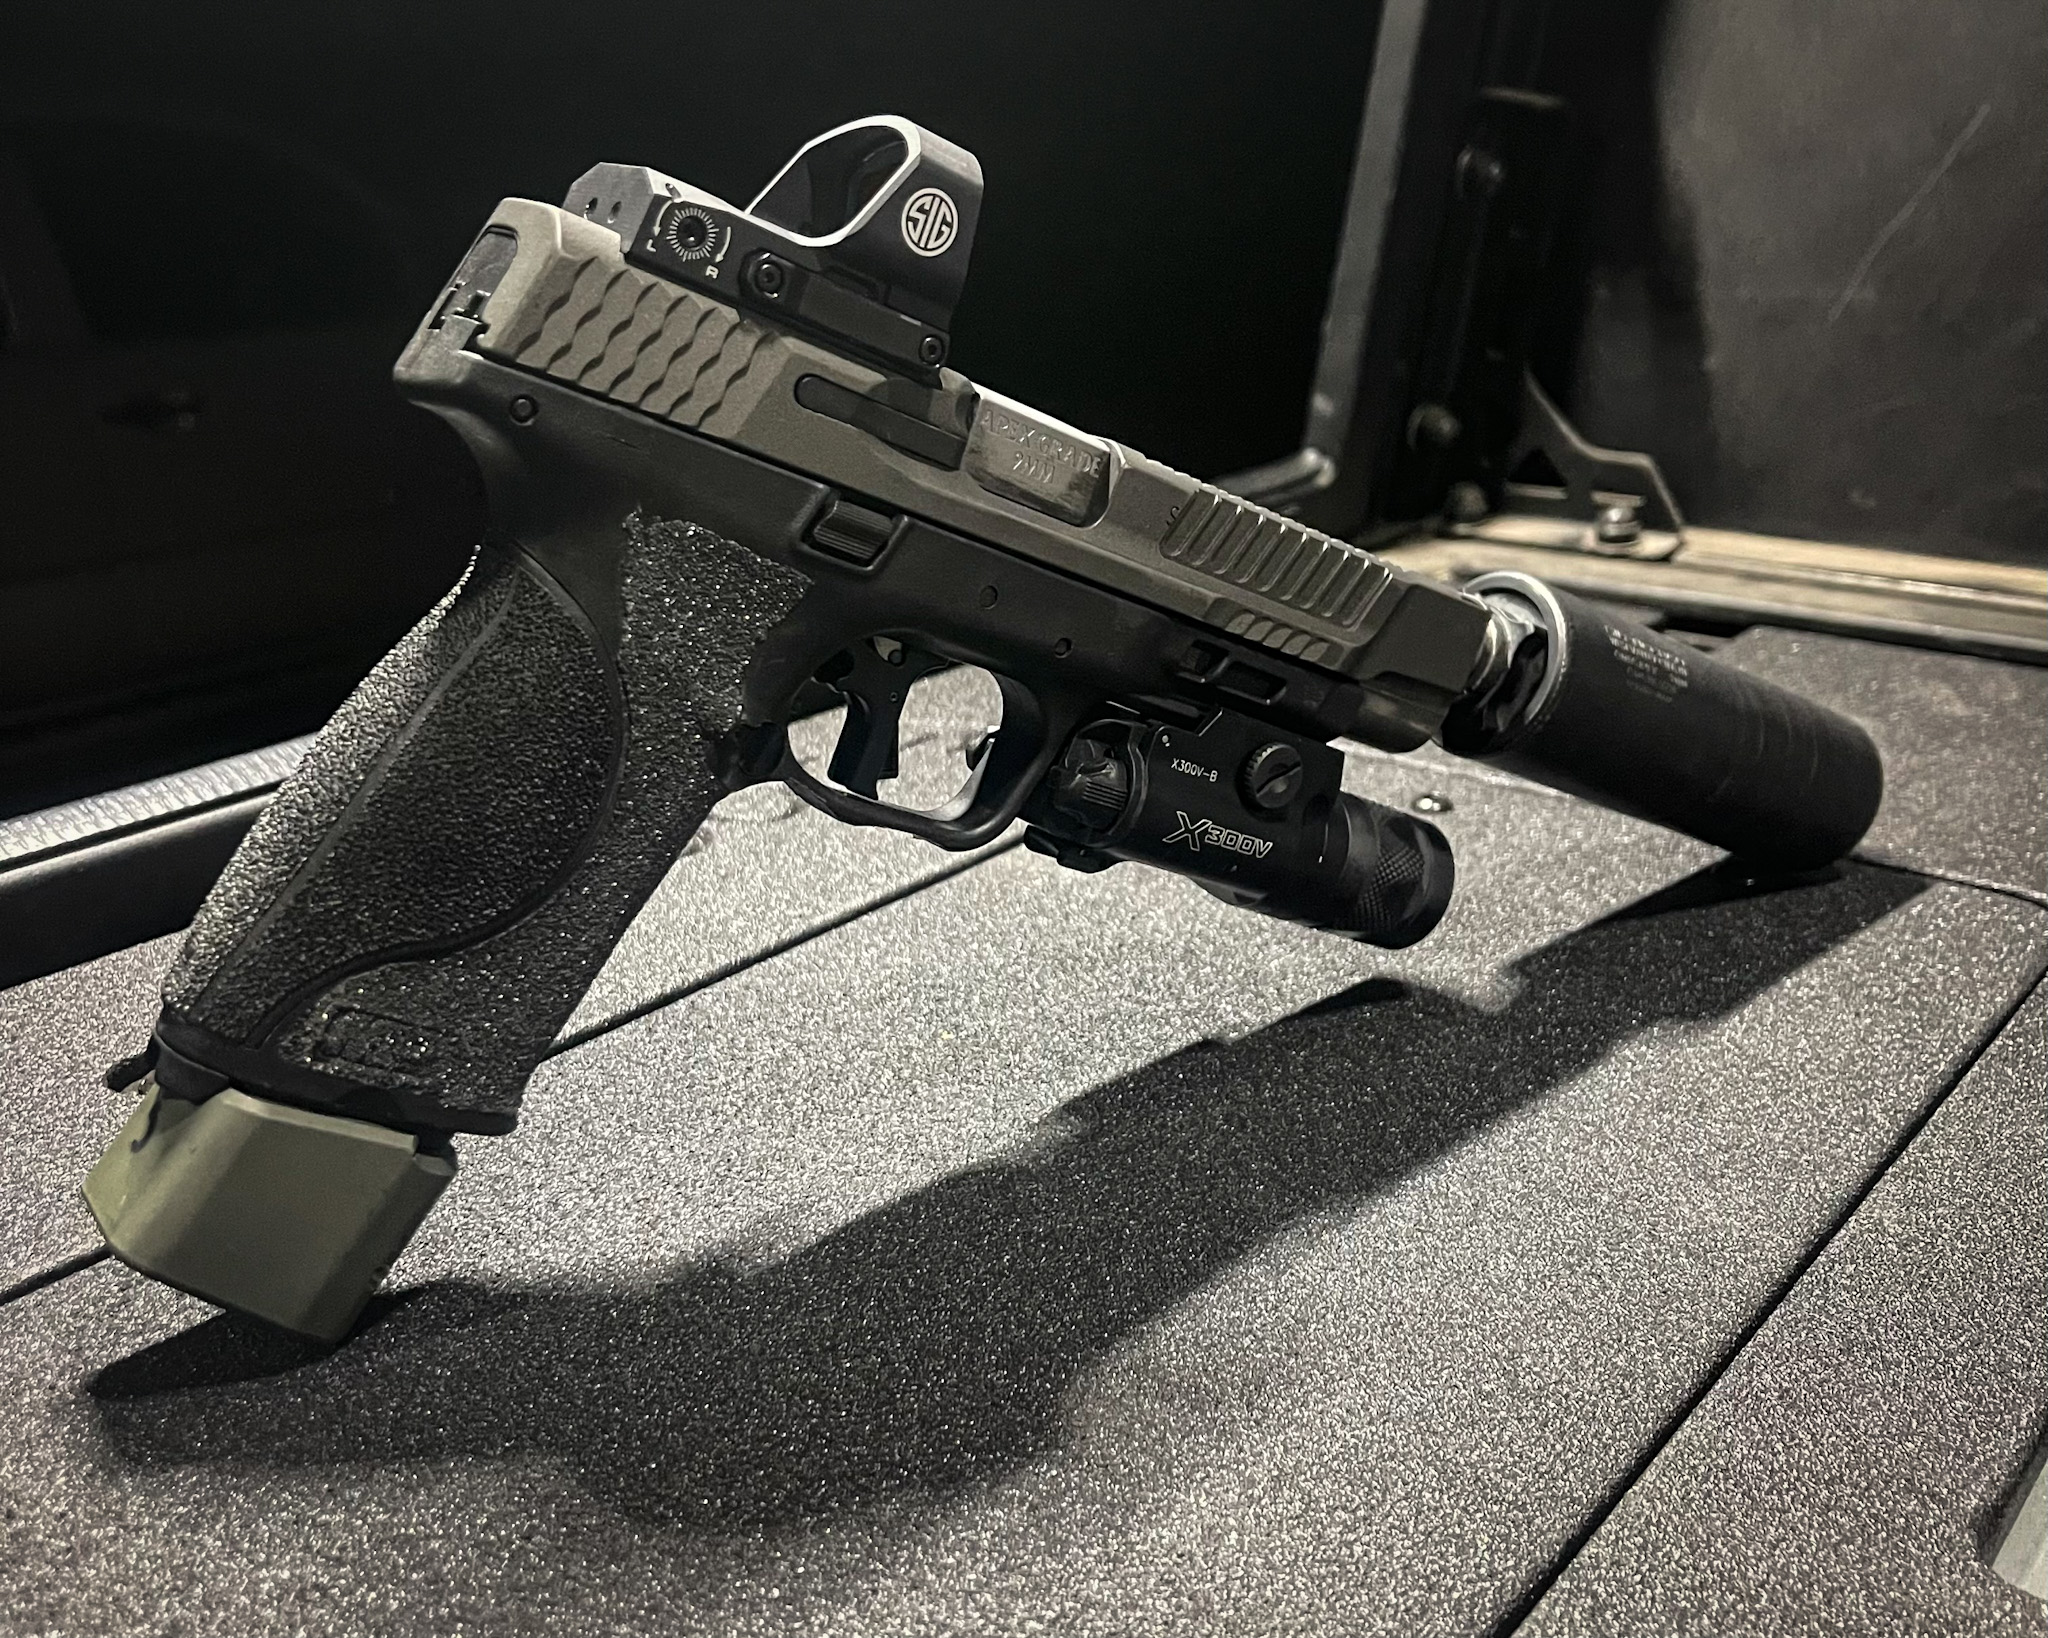 Smith & Wesson M&P9 Magazine: 17 Rounds of Reliable, Easy Feeding